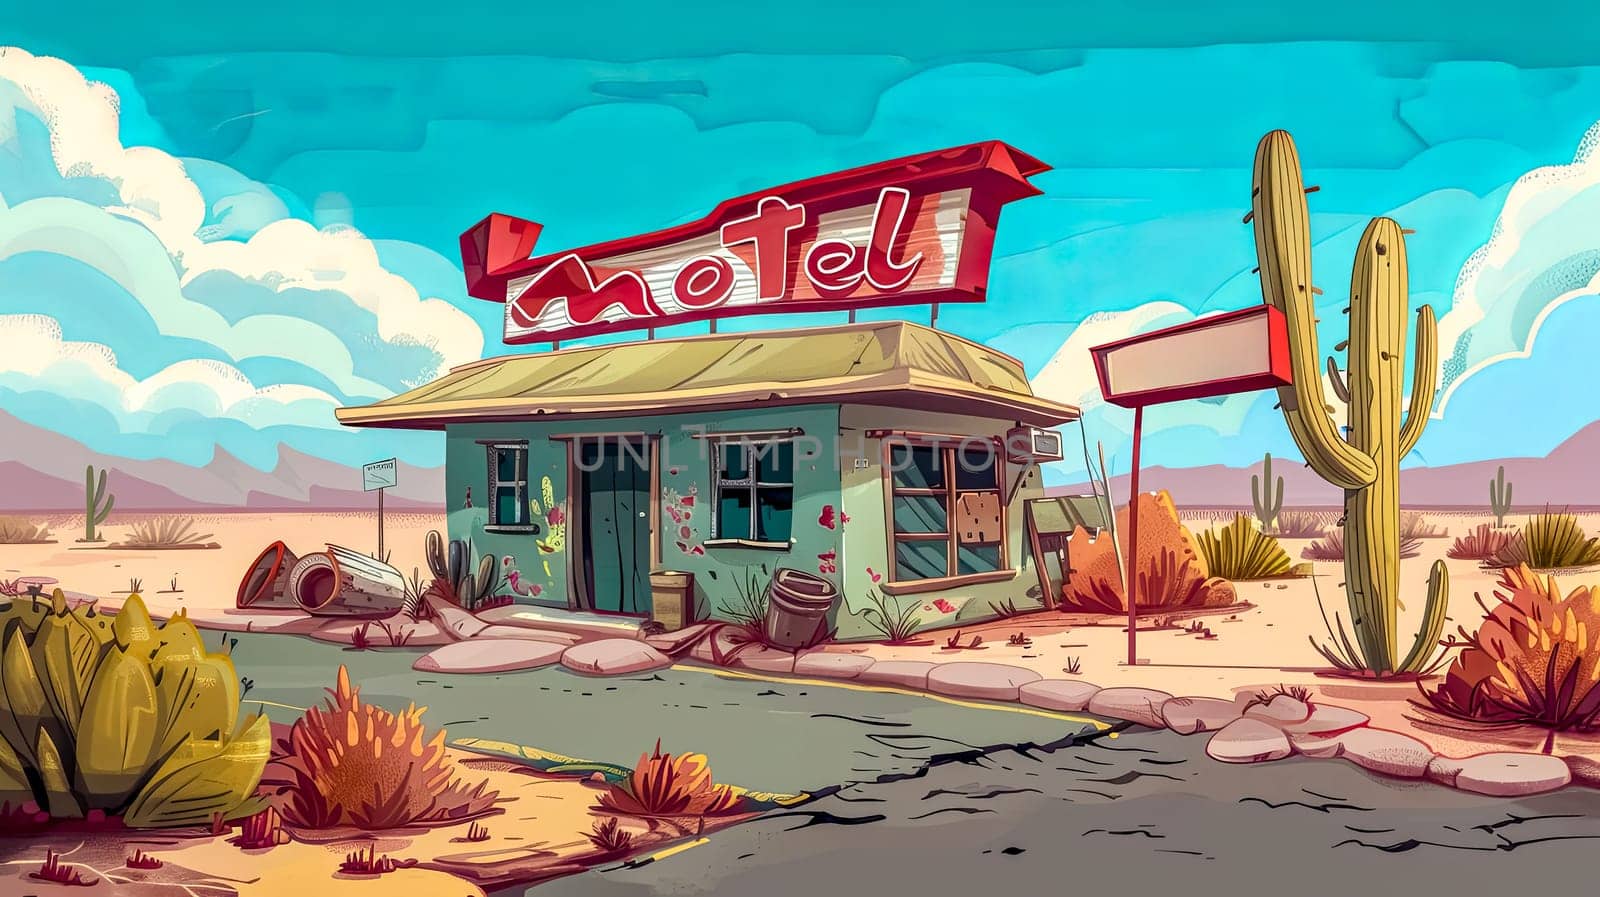 Vintage desert motel cartoon illustration with quirky and colorful abandoned cacti in a sunny arid landscape under a clear sky